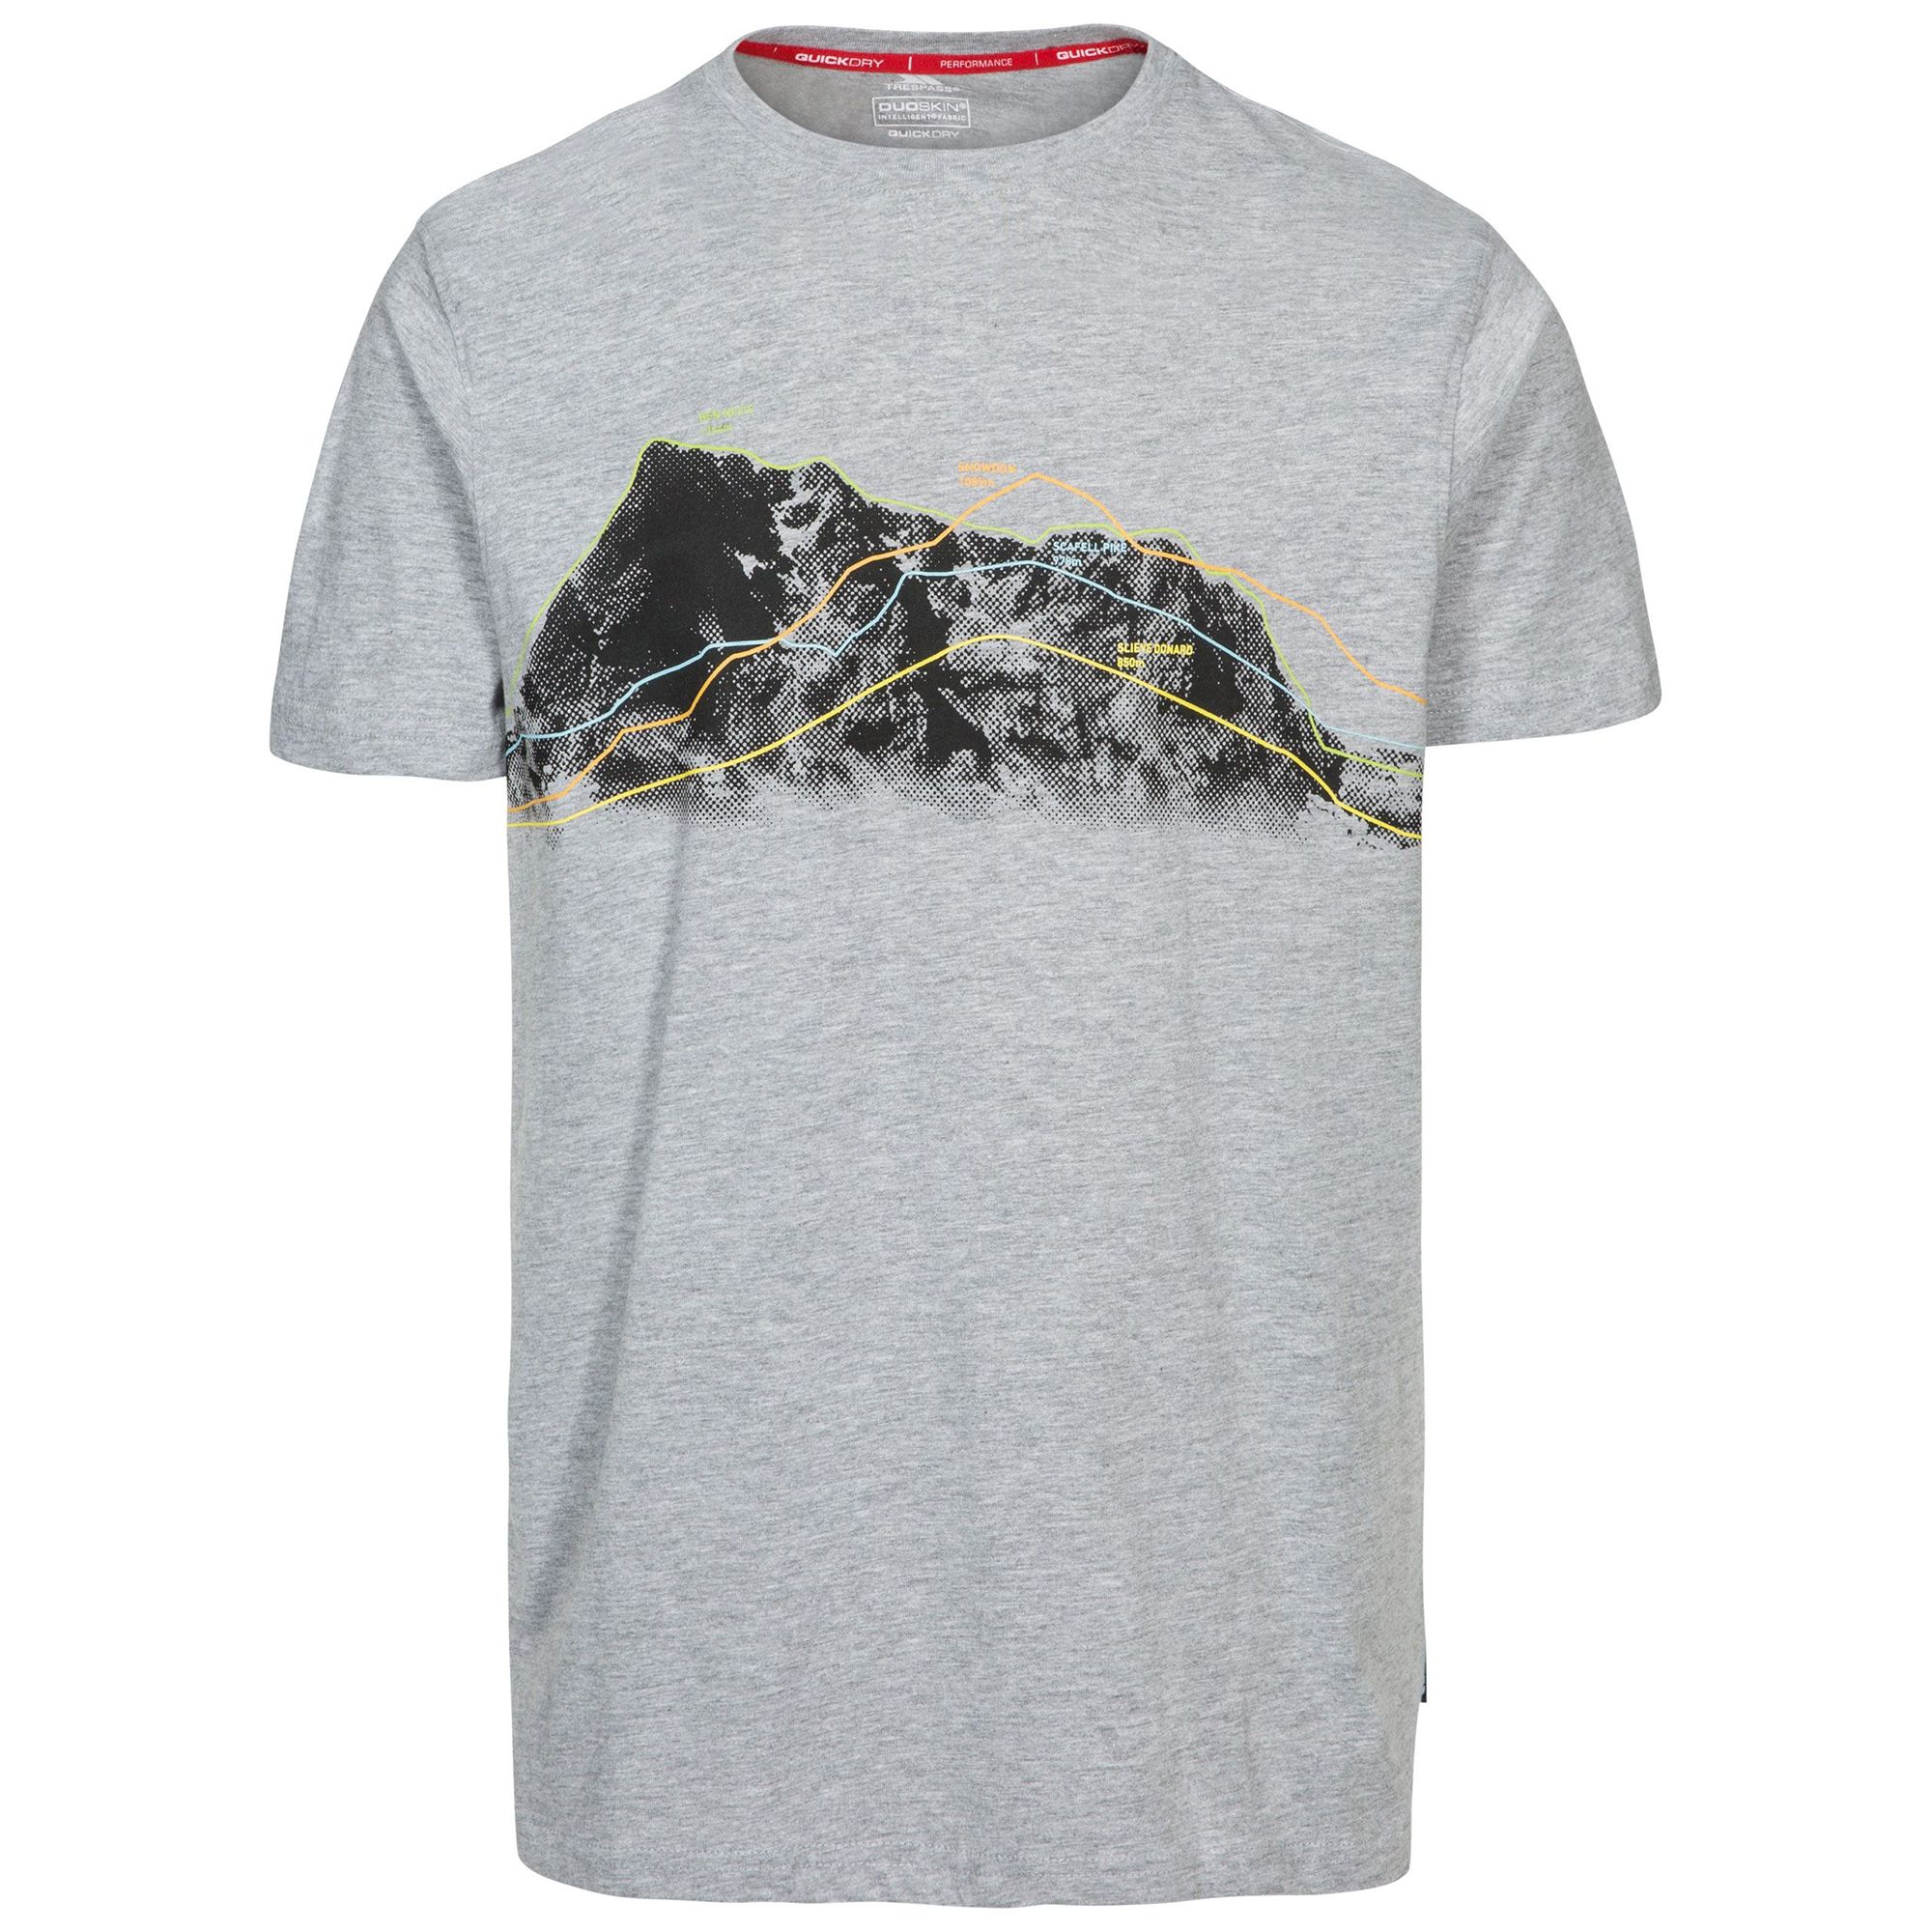 Short sleeves. Round neck. Print on chest. Quick dry. 60% Cotton, 40% Polyester. Trespass Mens Chest Sizing (approx): S - 35-37in/89-94cm, M - 38-40in/96.5-101.5cm, L - 41-43in/104-109cm, XL - 44-46in/111.5-117cm, XXL - 46-48in/117-122cm, 3XL - 48-50in/122-127cm.